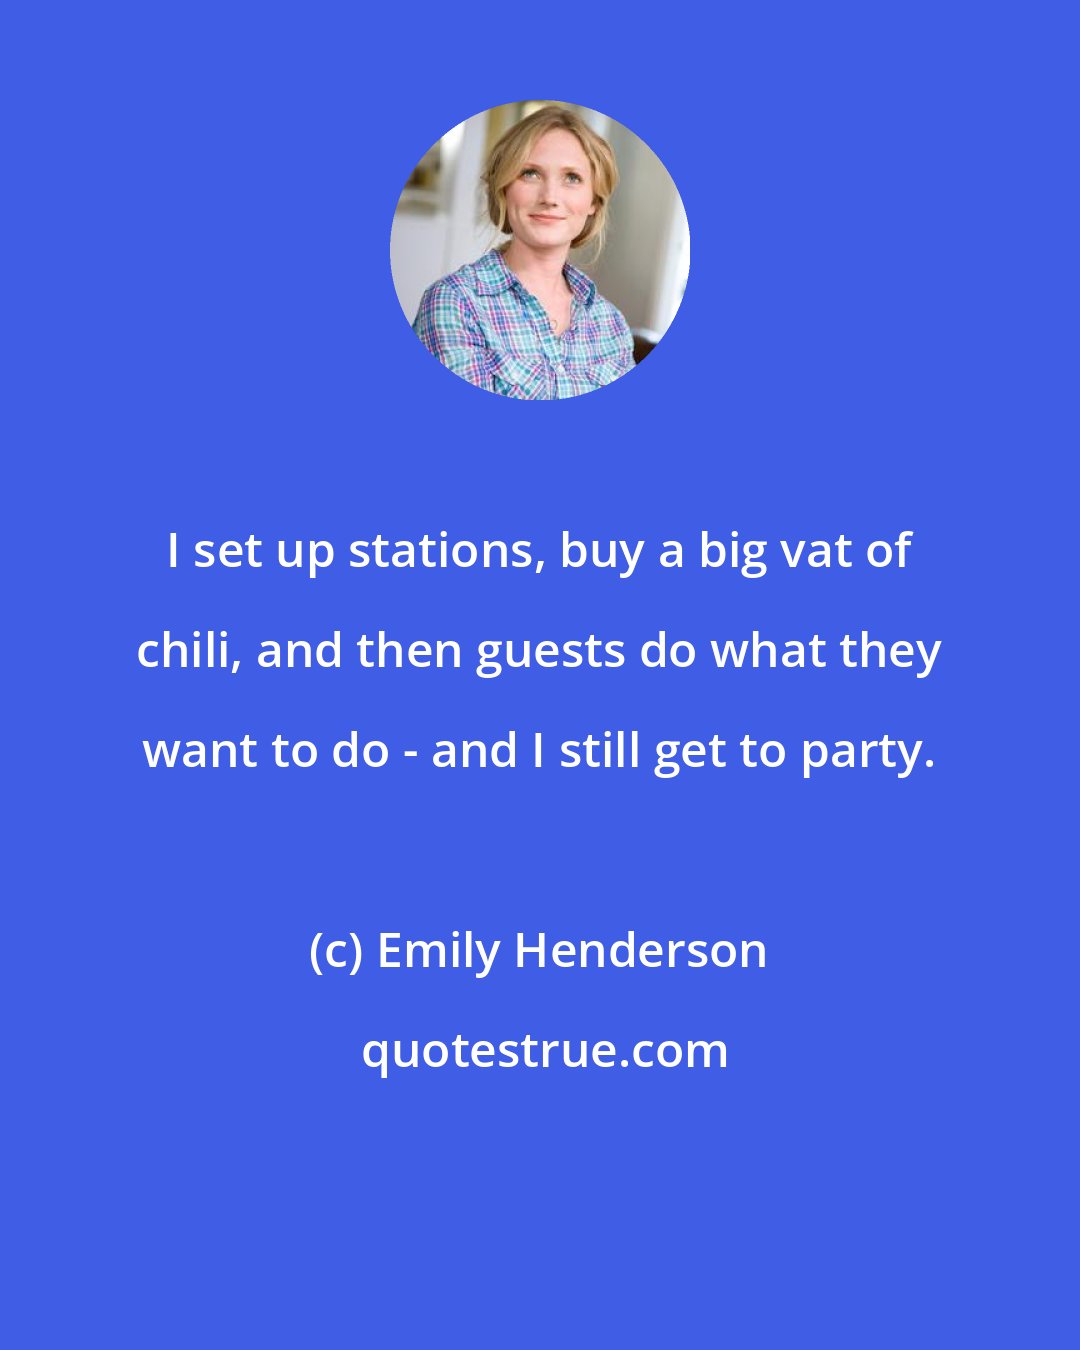 Emily Henderson: I set up stations, buy a big vat of chili, and then guests do what they want to do - and I still get to party.